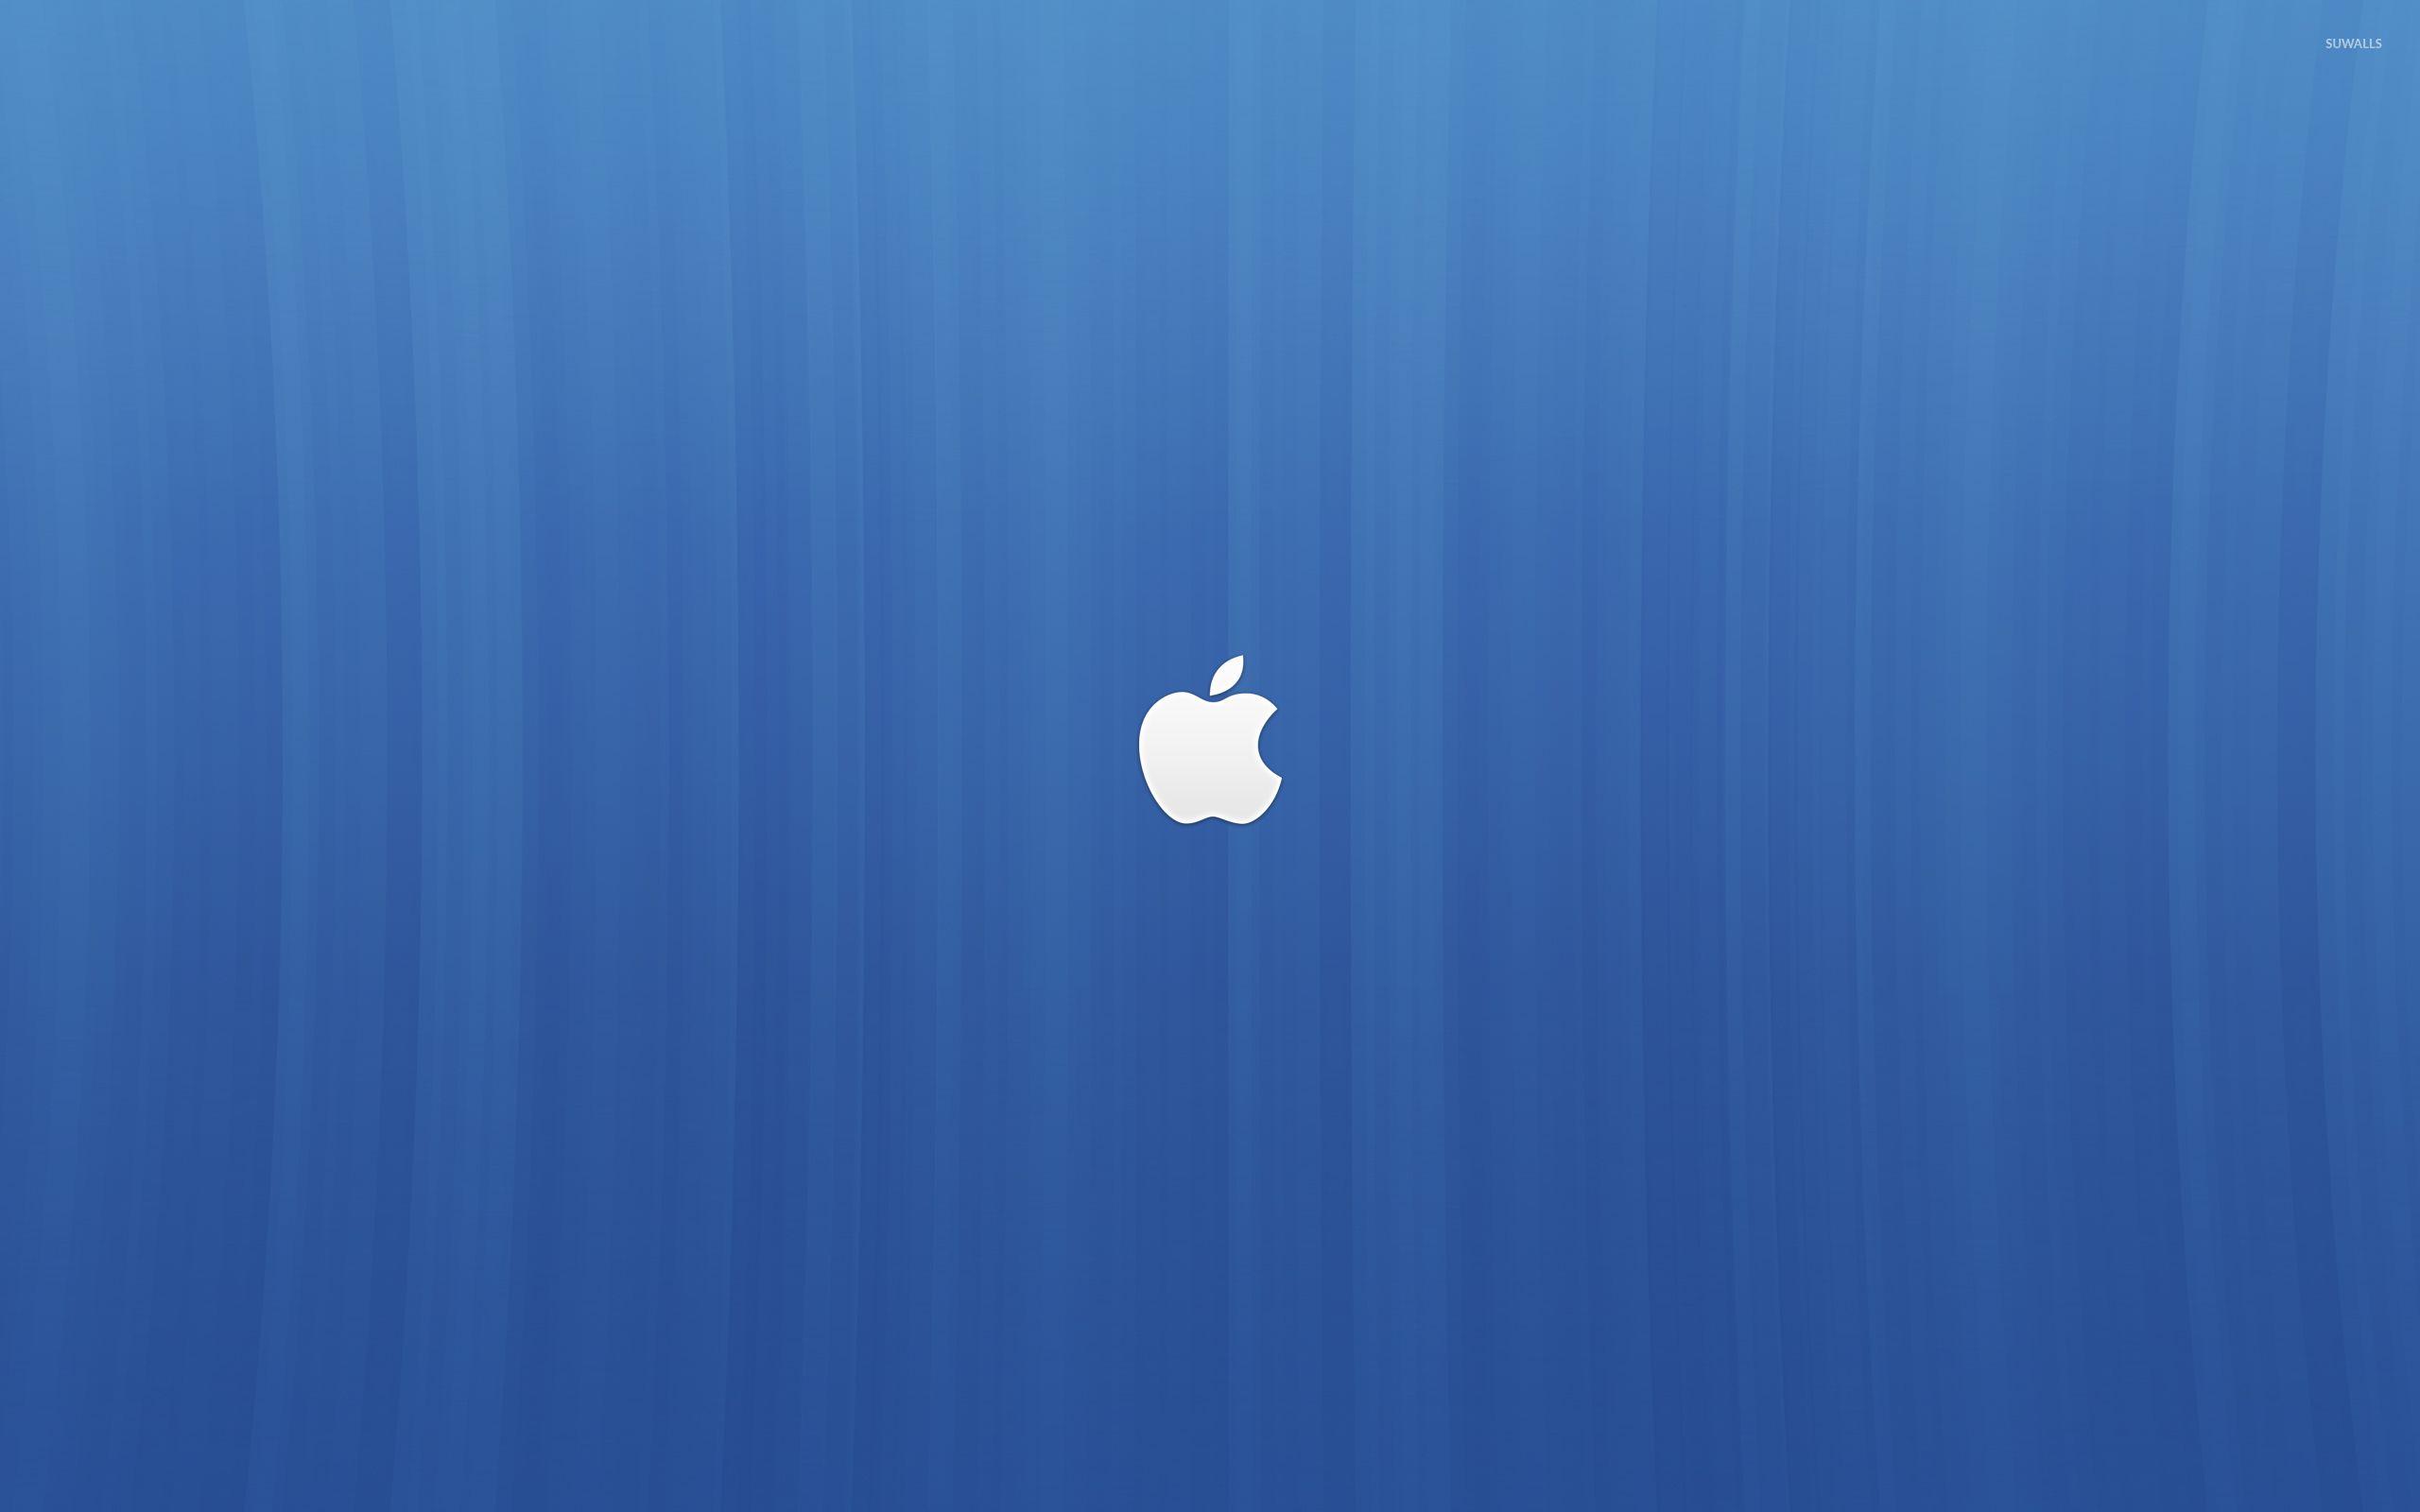 White and Blue Lines Logo - White Apple logo on blue lines wallpaper - Computer wallpapers - #54107